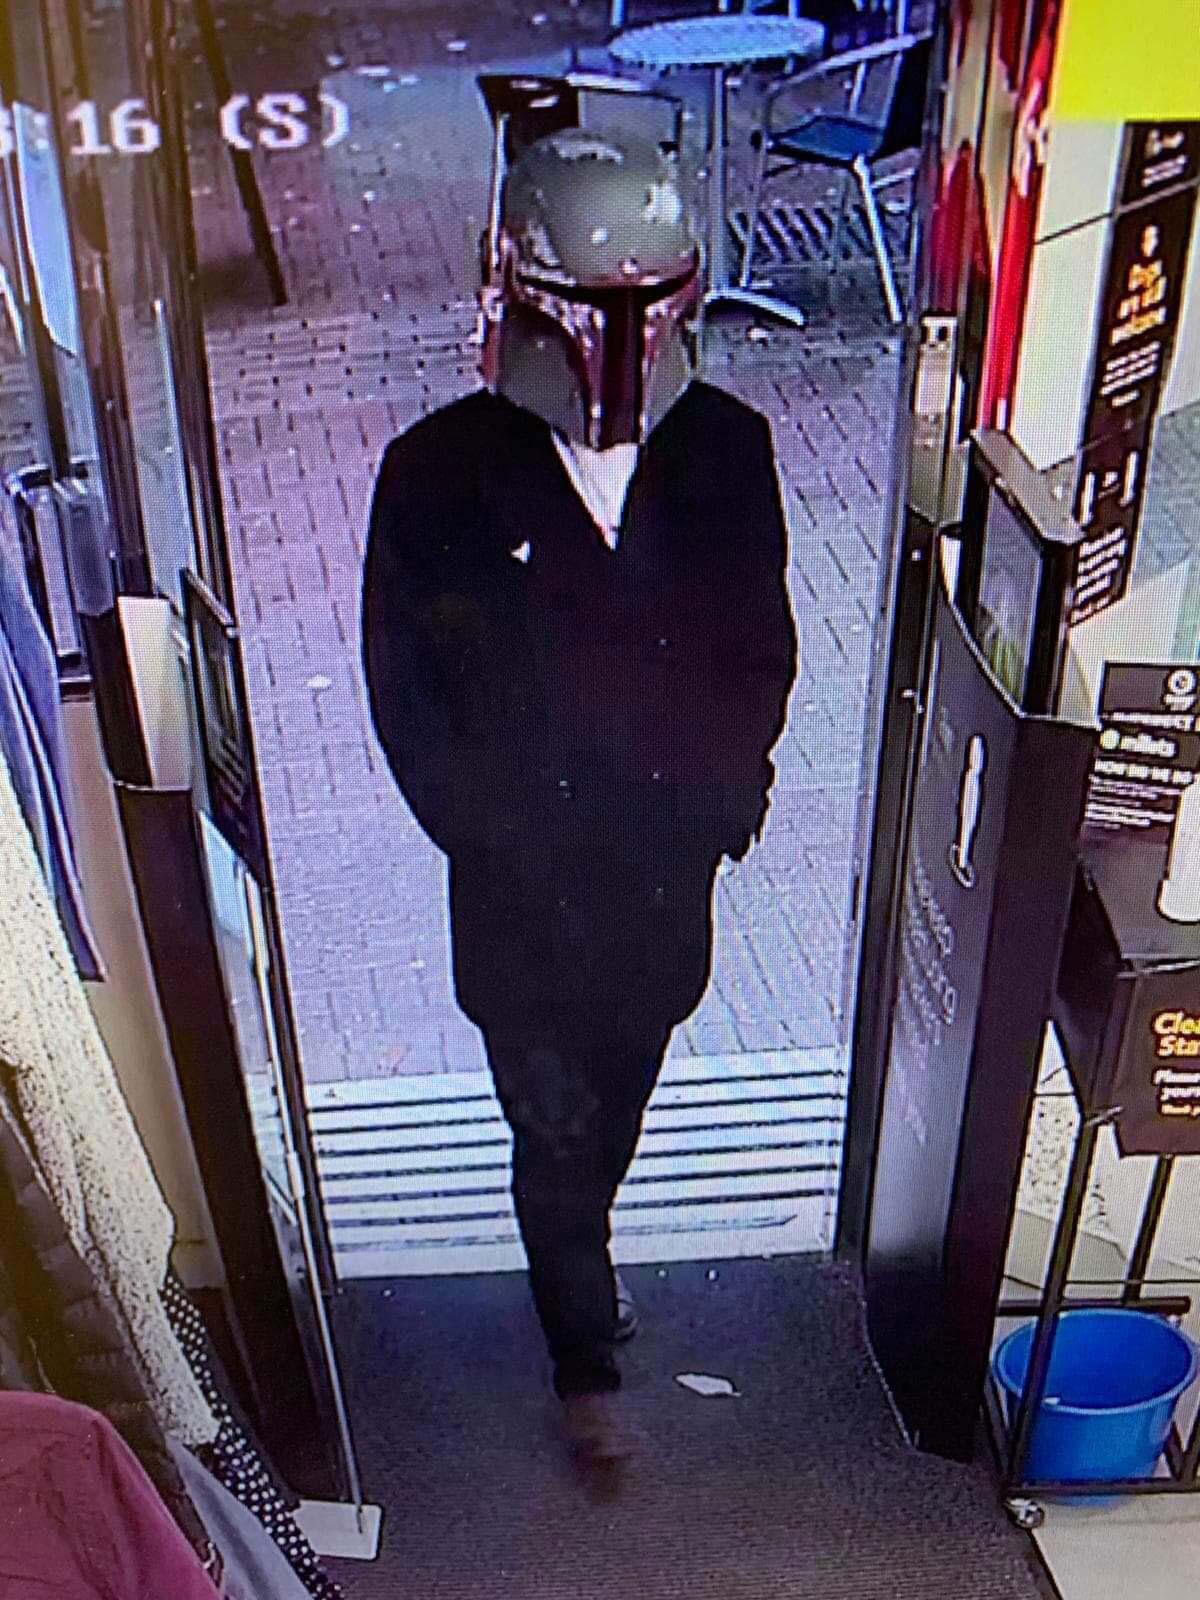 This masked man entered the store